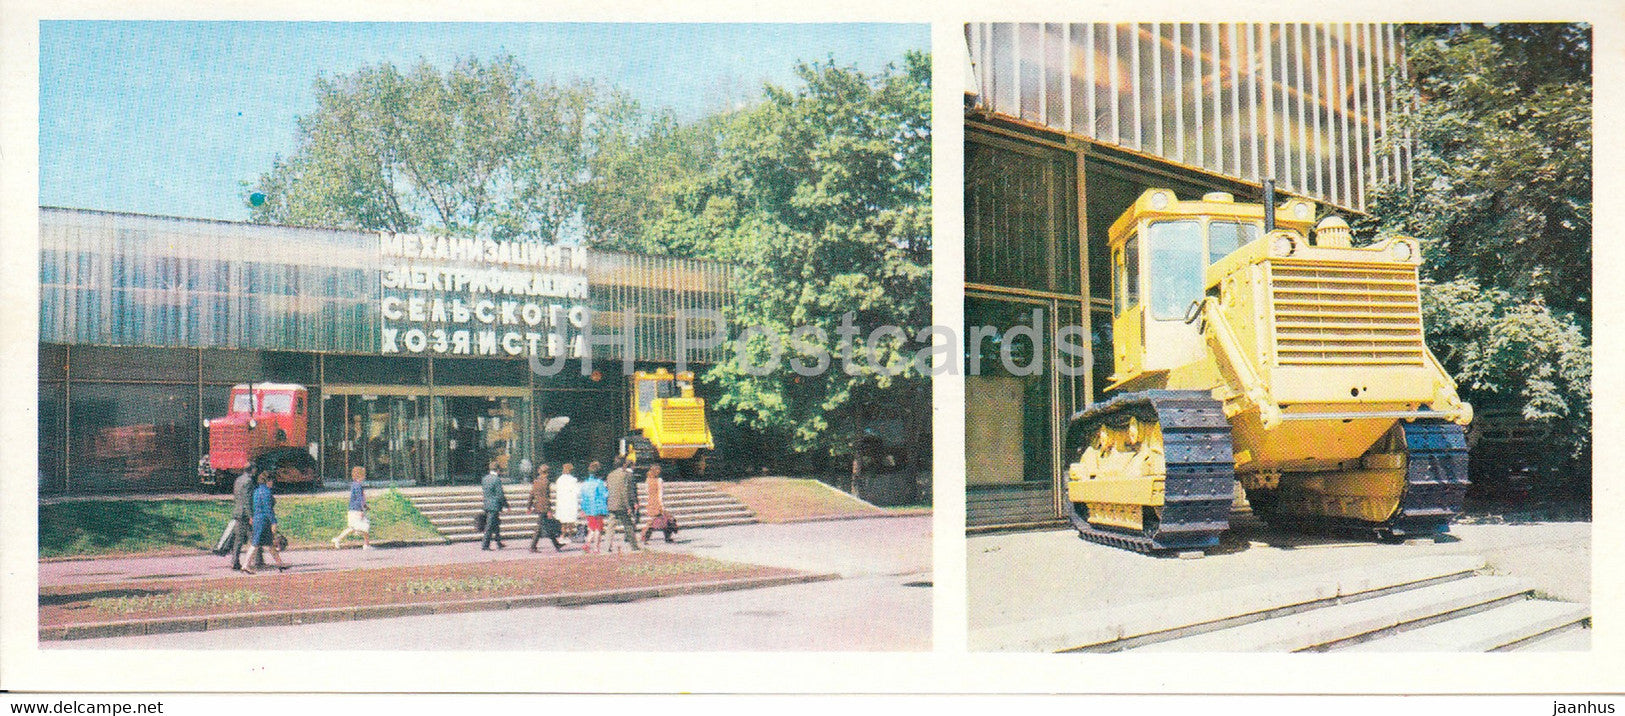 Farm Mechanization and Electrification pavilion - tractor T-130 - VDNKh - 1975 - Russia USSR - unused - JH Postcards